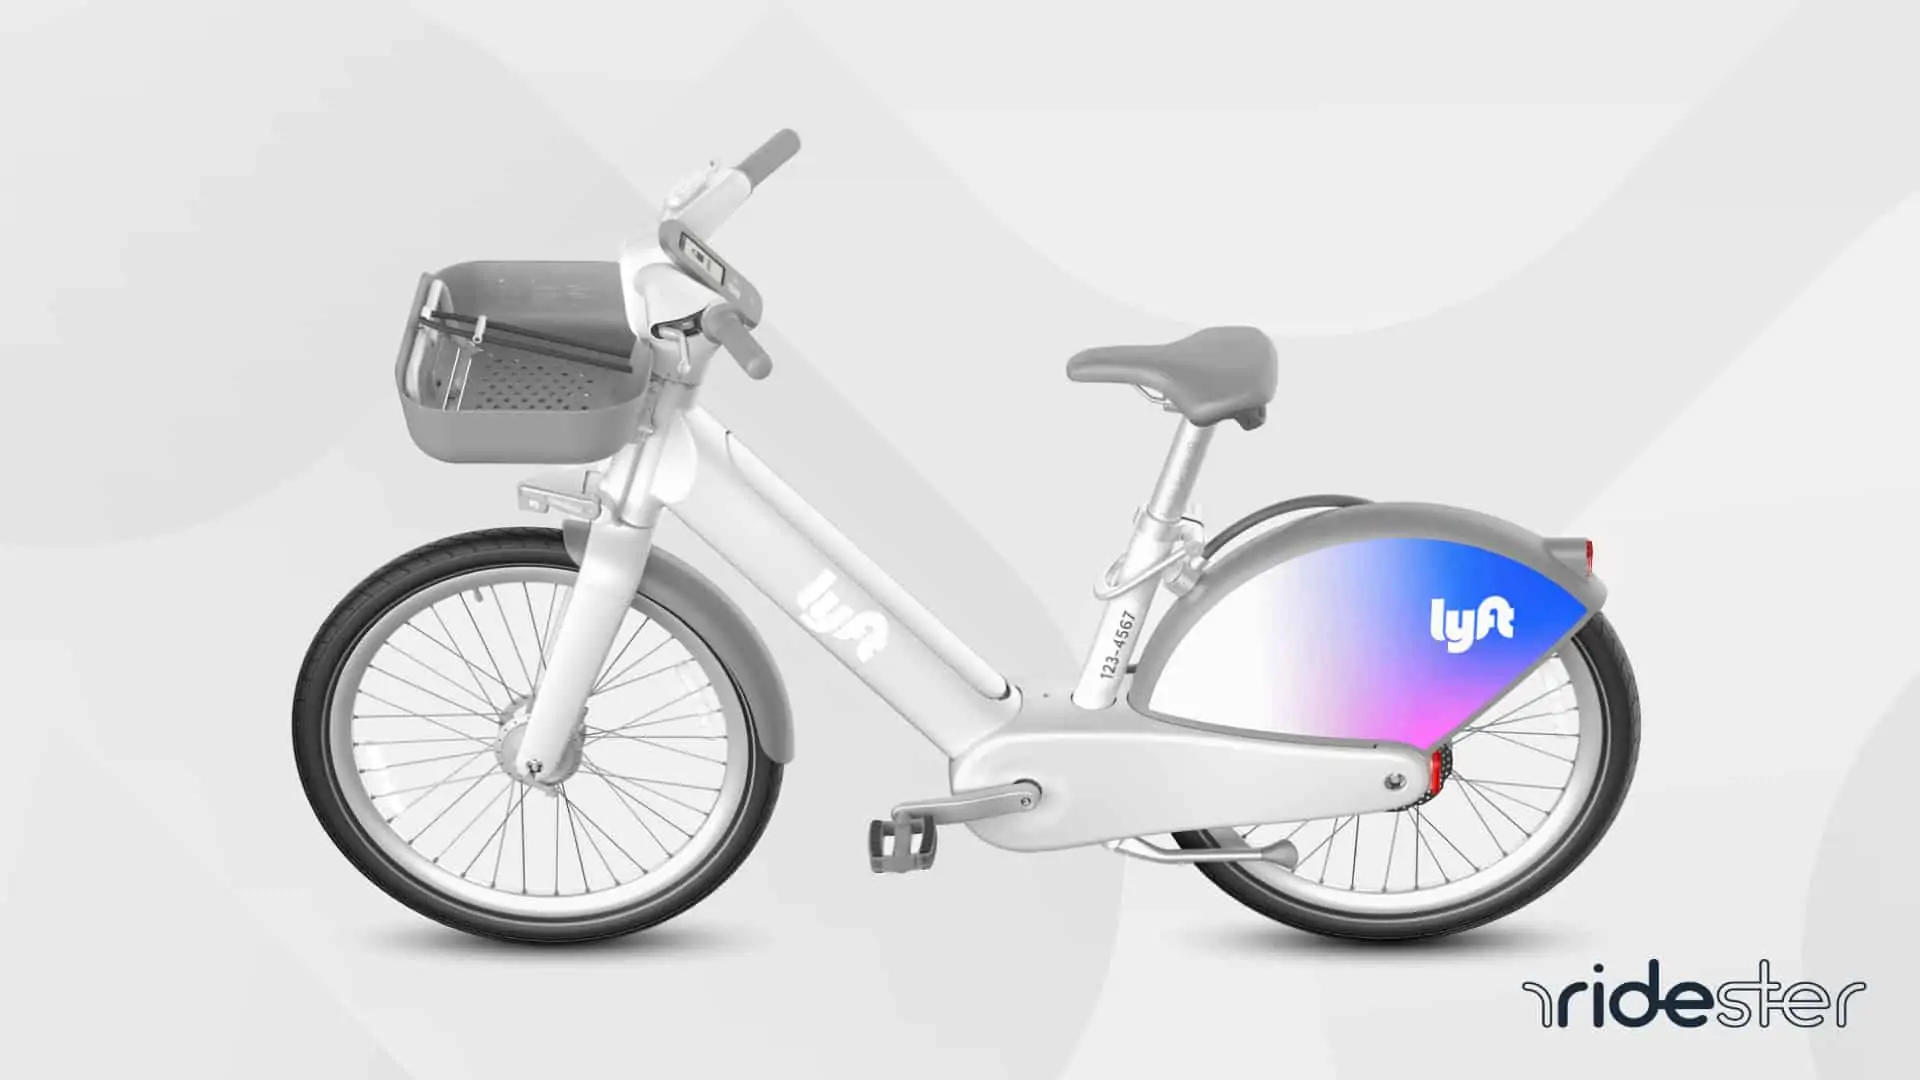 vector graphic showing a lyft bike against a background